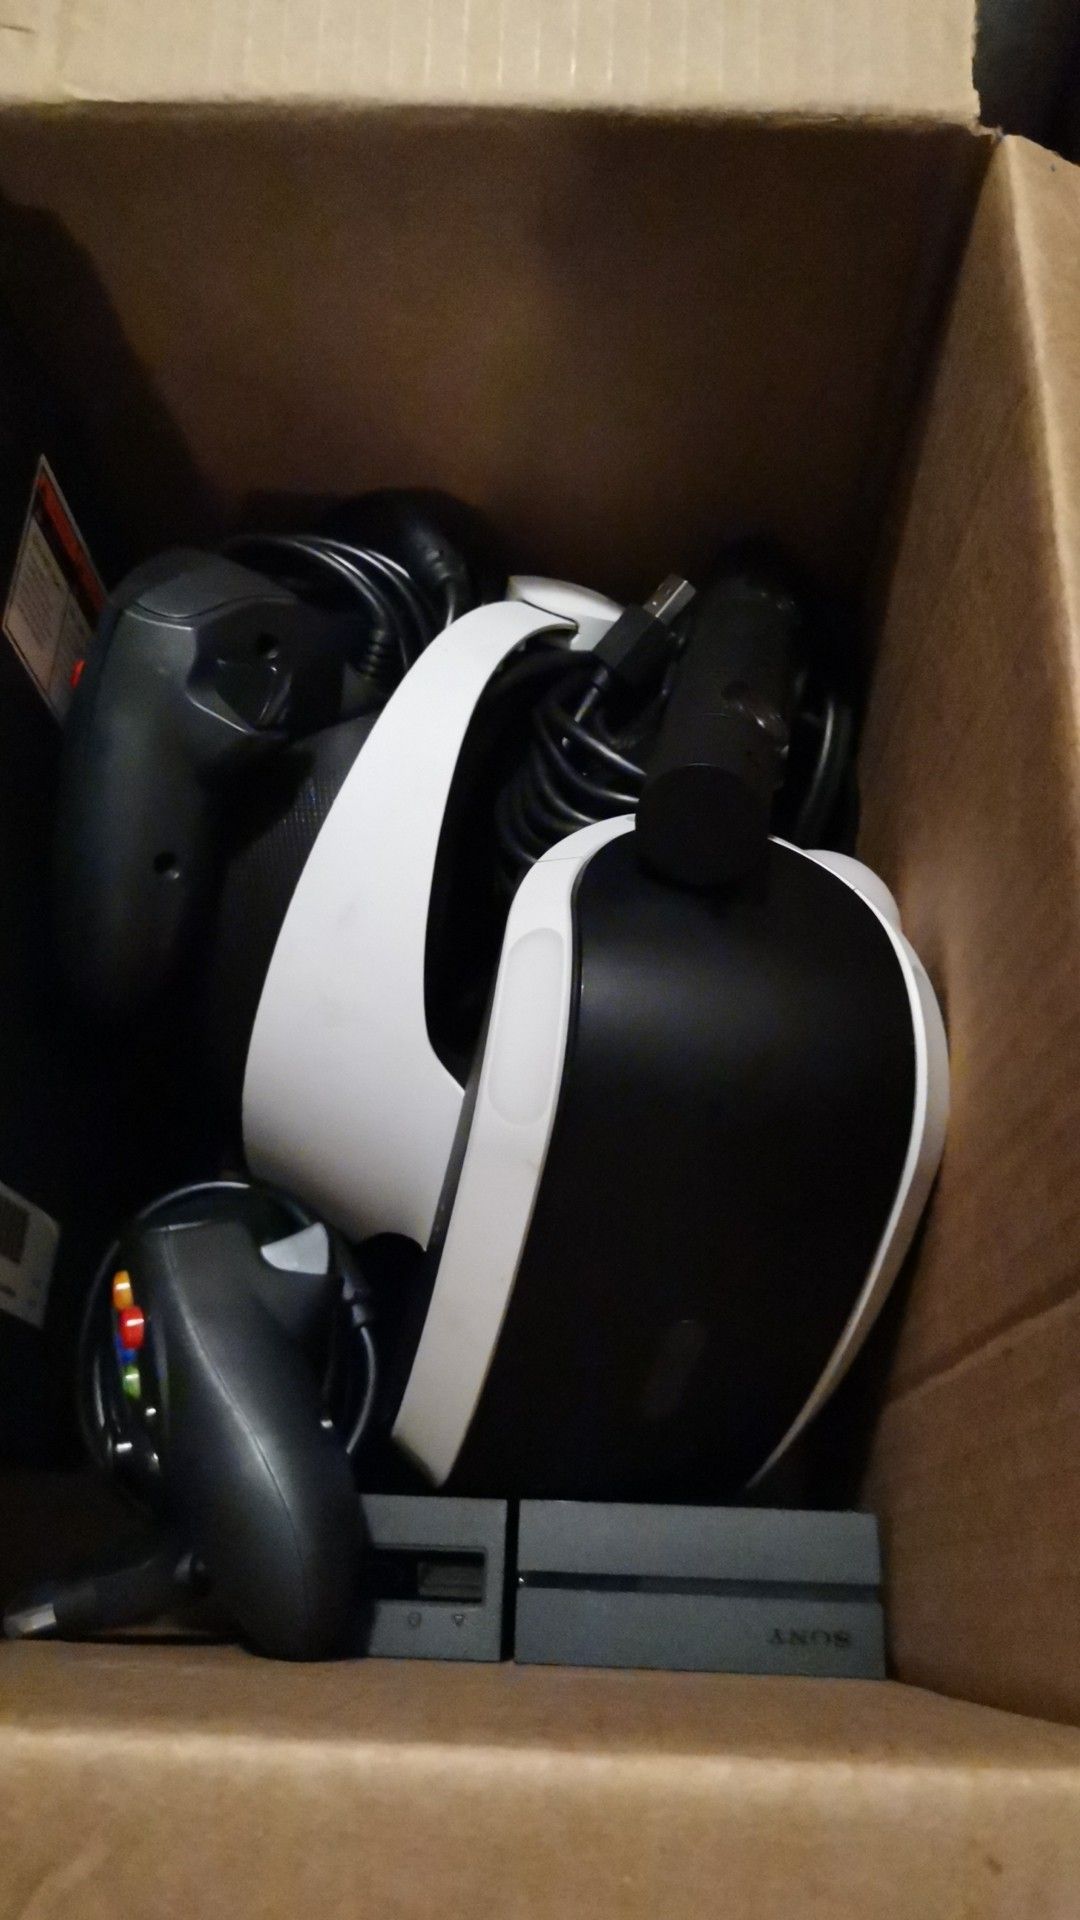 Ps4 vr headset